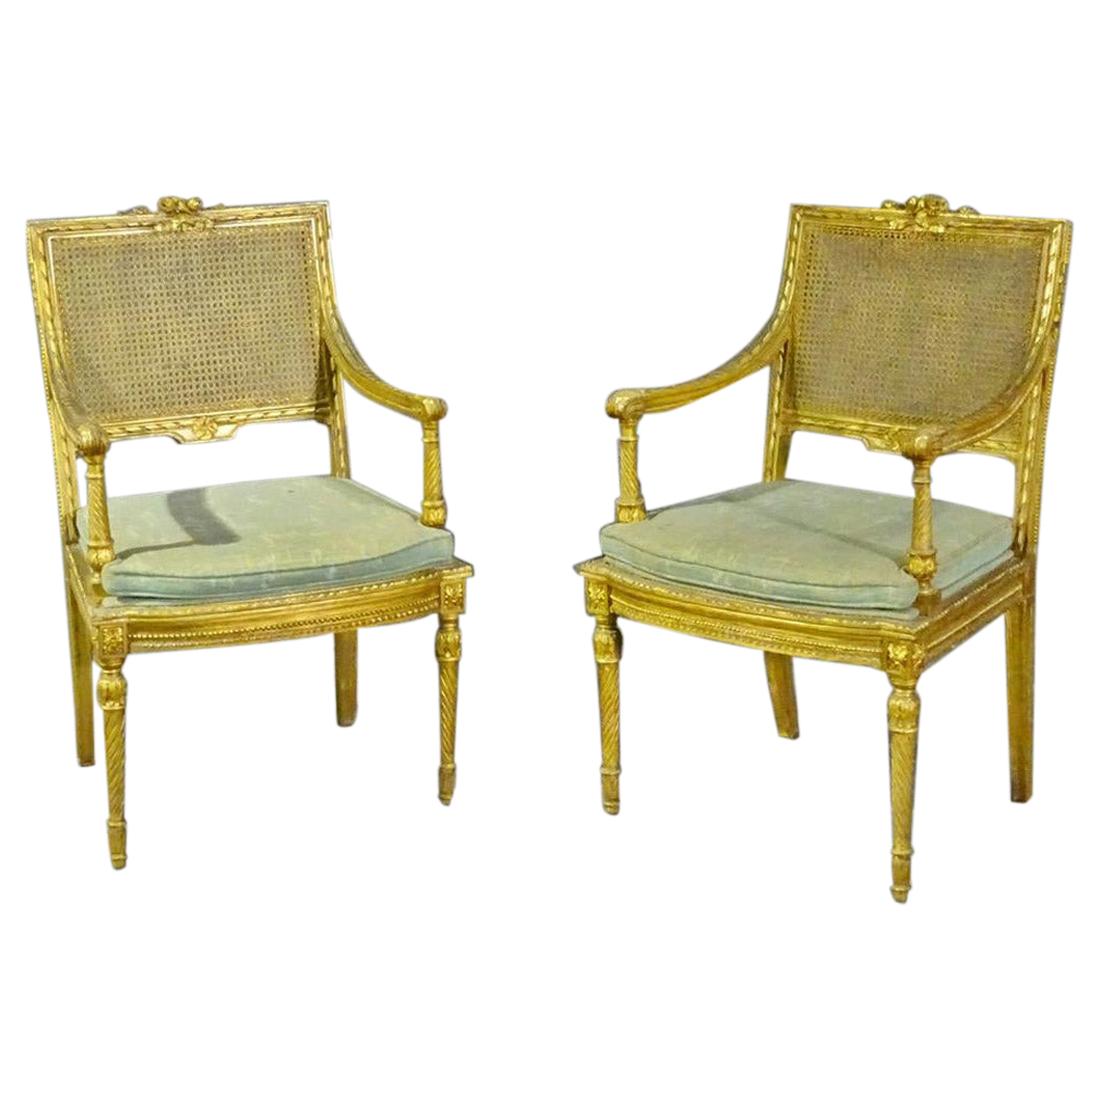 Pair of French Louis XVI Gilded Caned Armchairs Armchairs Fauteuils, circa 1920s